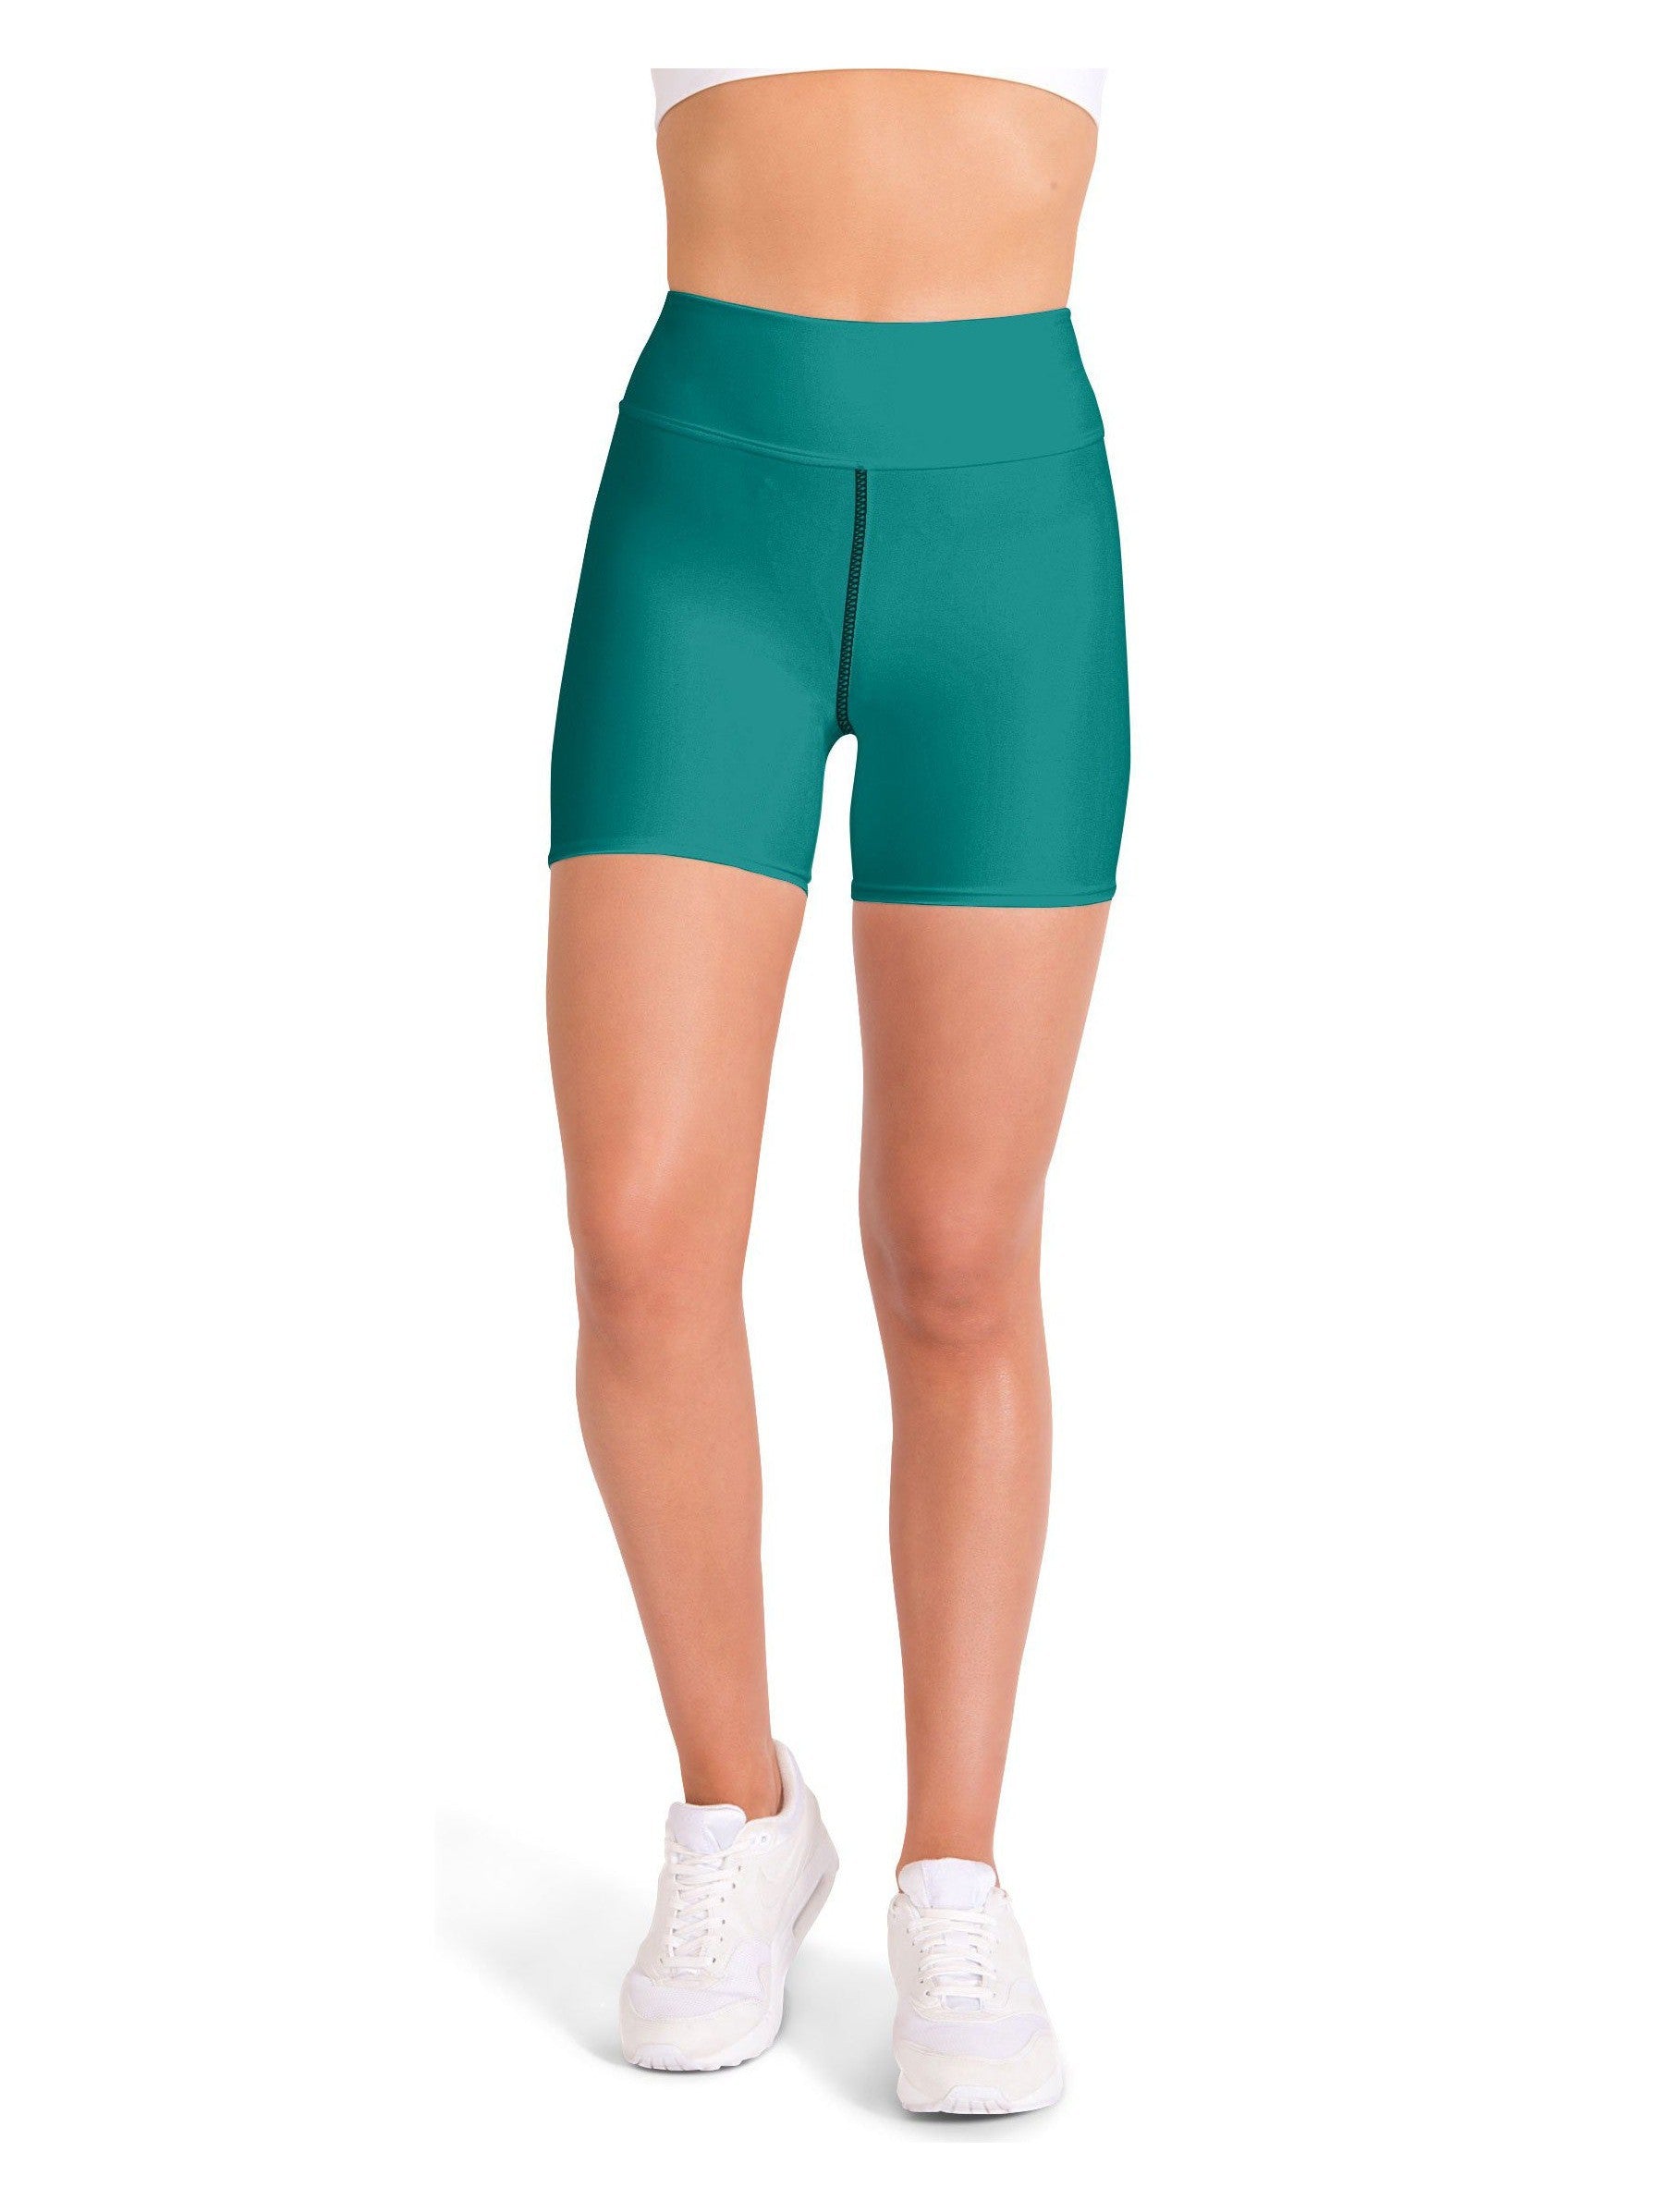 Solid Teal Yoga Shorts Gearbunch